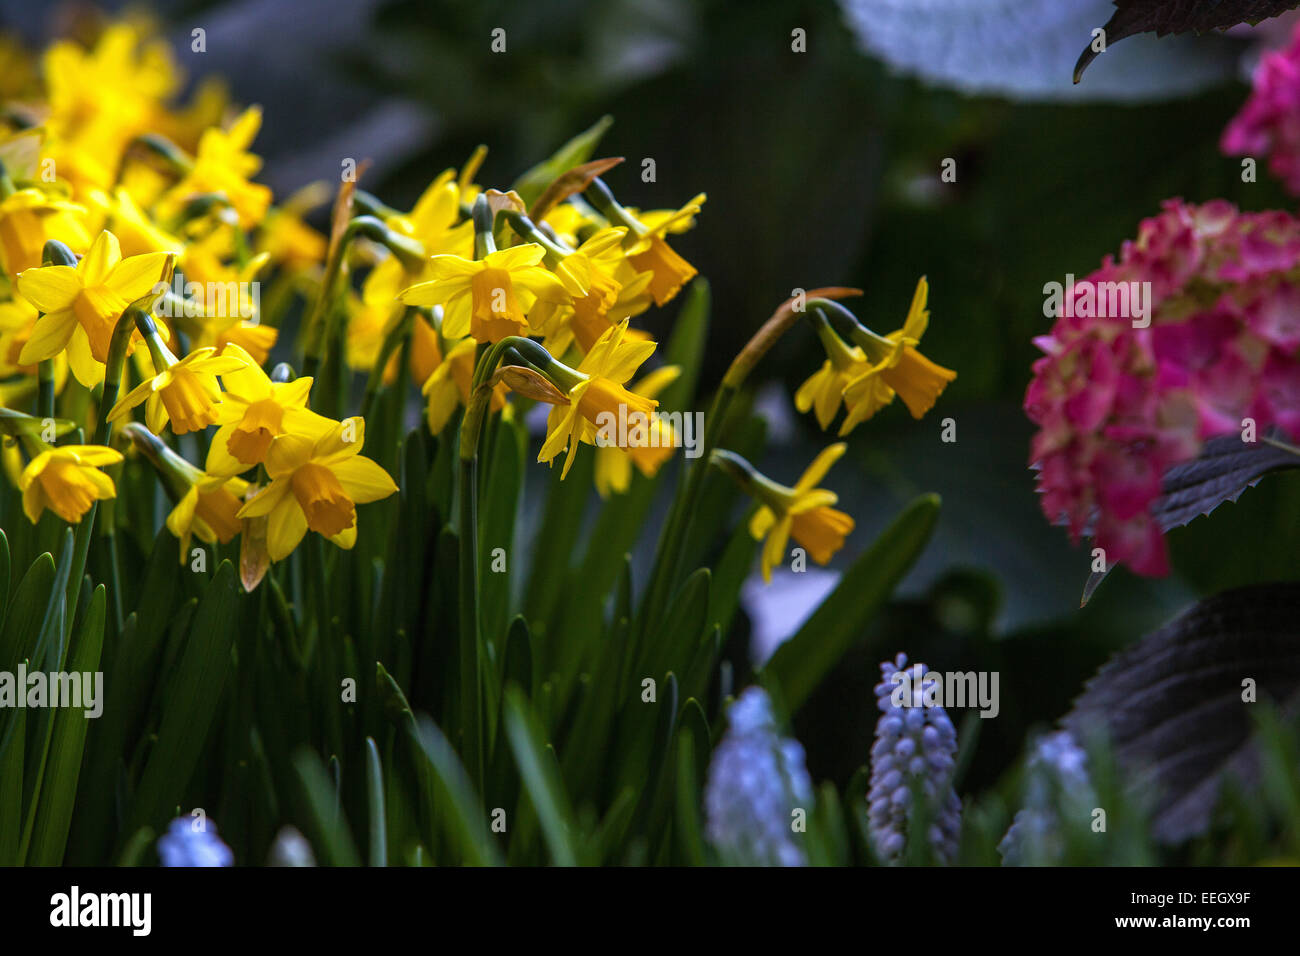 Yellow narcissus spring garden daffodils flowers Stock Photo